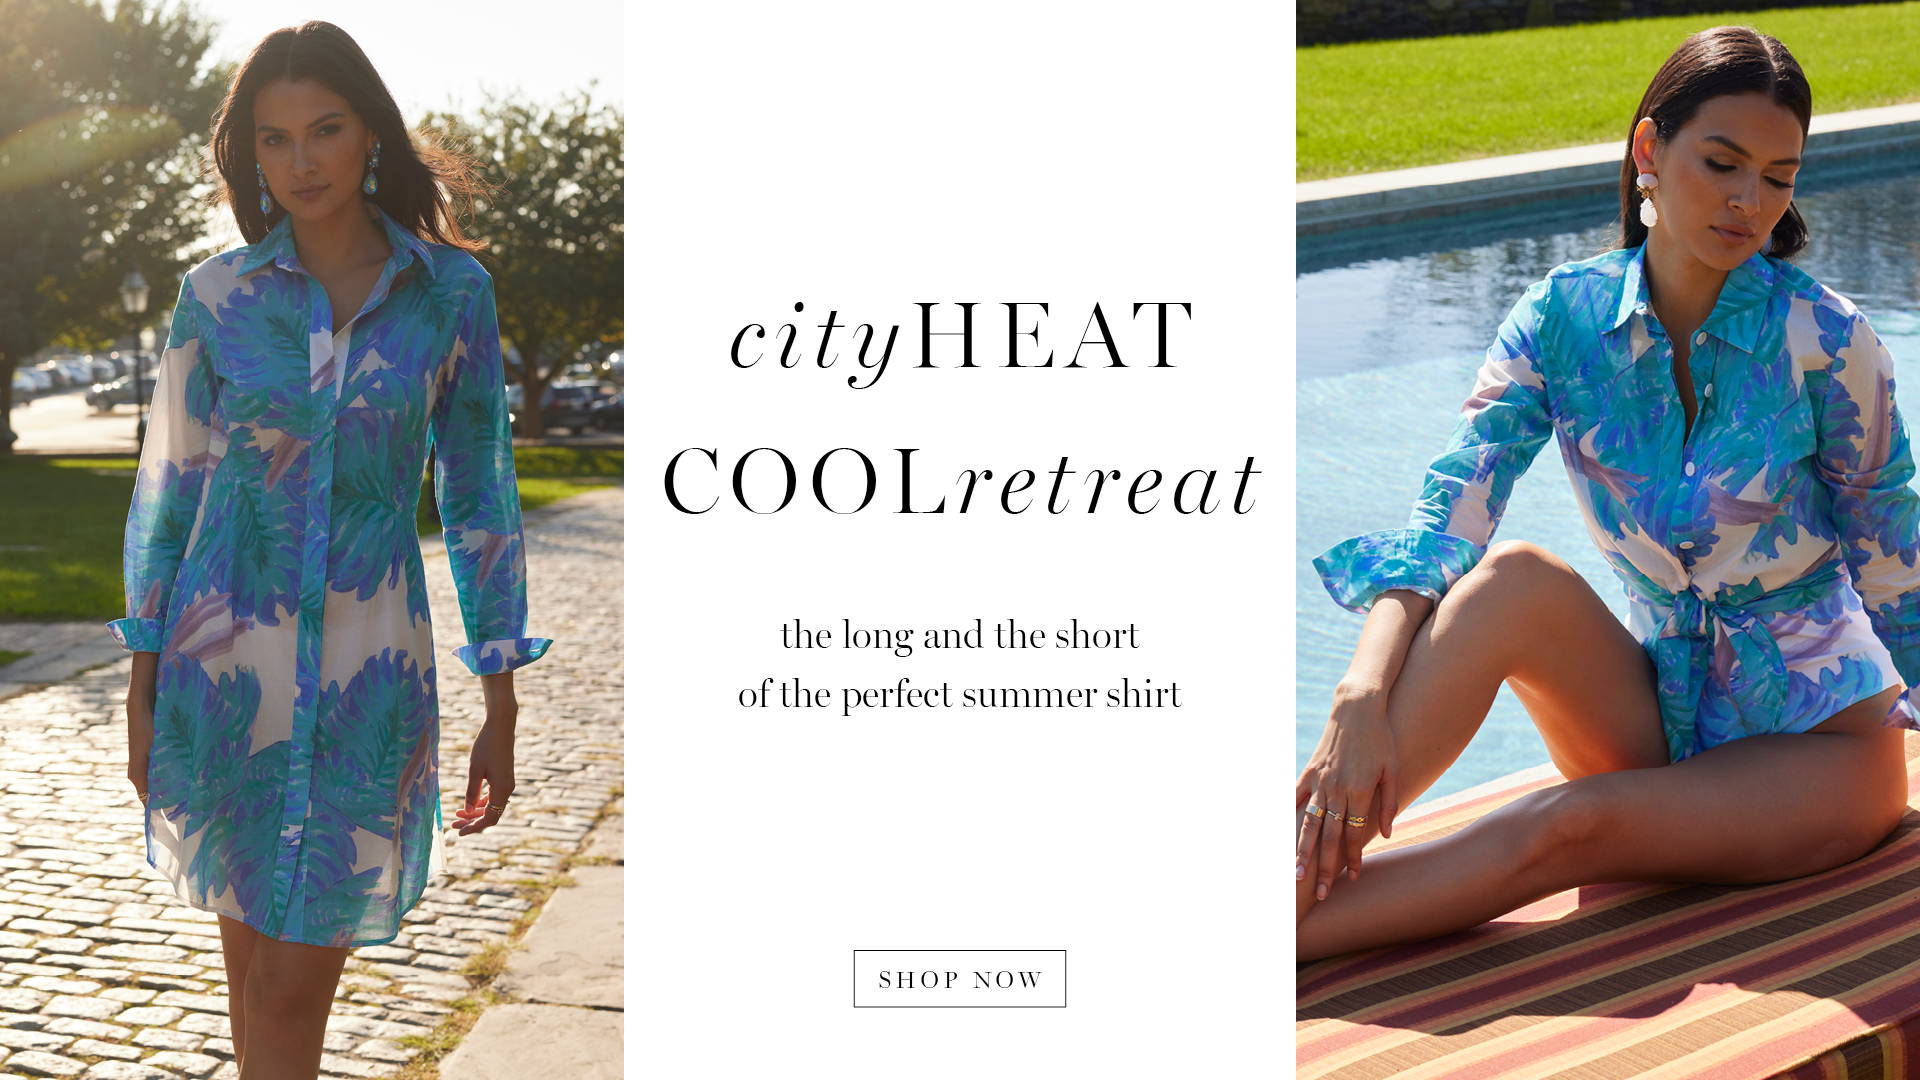 city heat cool retreat | the long and the short of the perfect summer shirt | Woman wearing short shirt dress in blue floral printed and woman wearing blue floral shirt over matching bating suit 